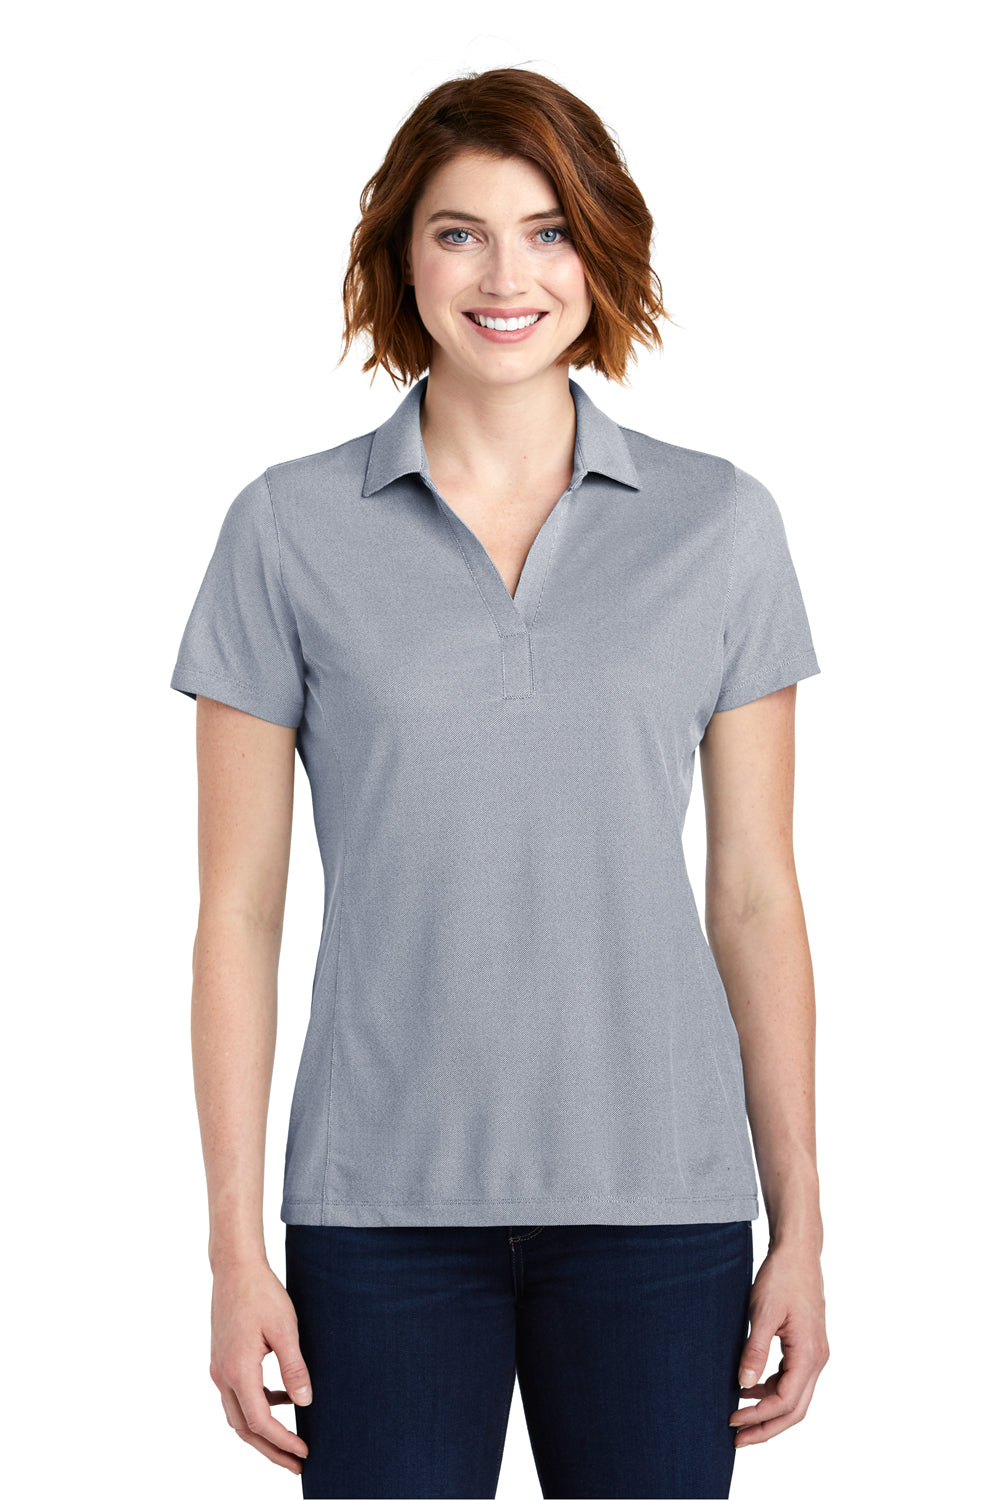 Port Authority LK582 Womens Oxford Moisture Wicking Short Sleeve Polo Shirt Navy Blue Front